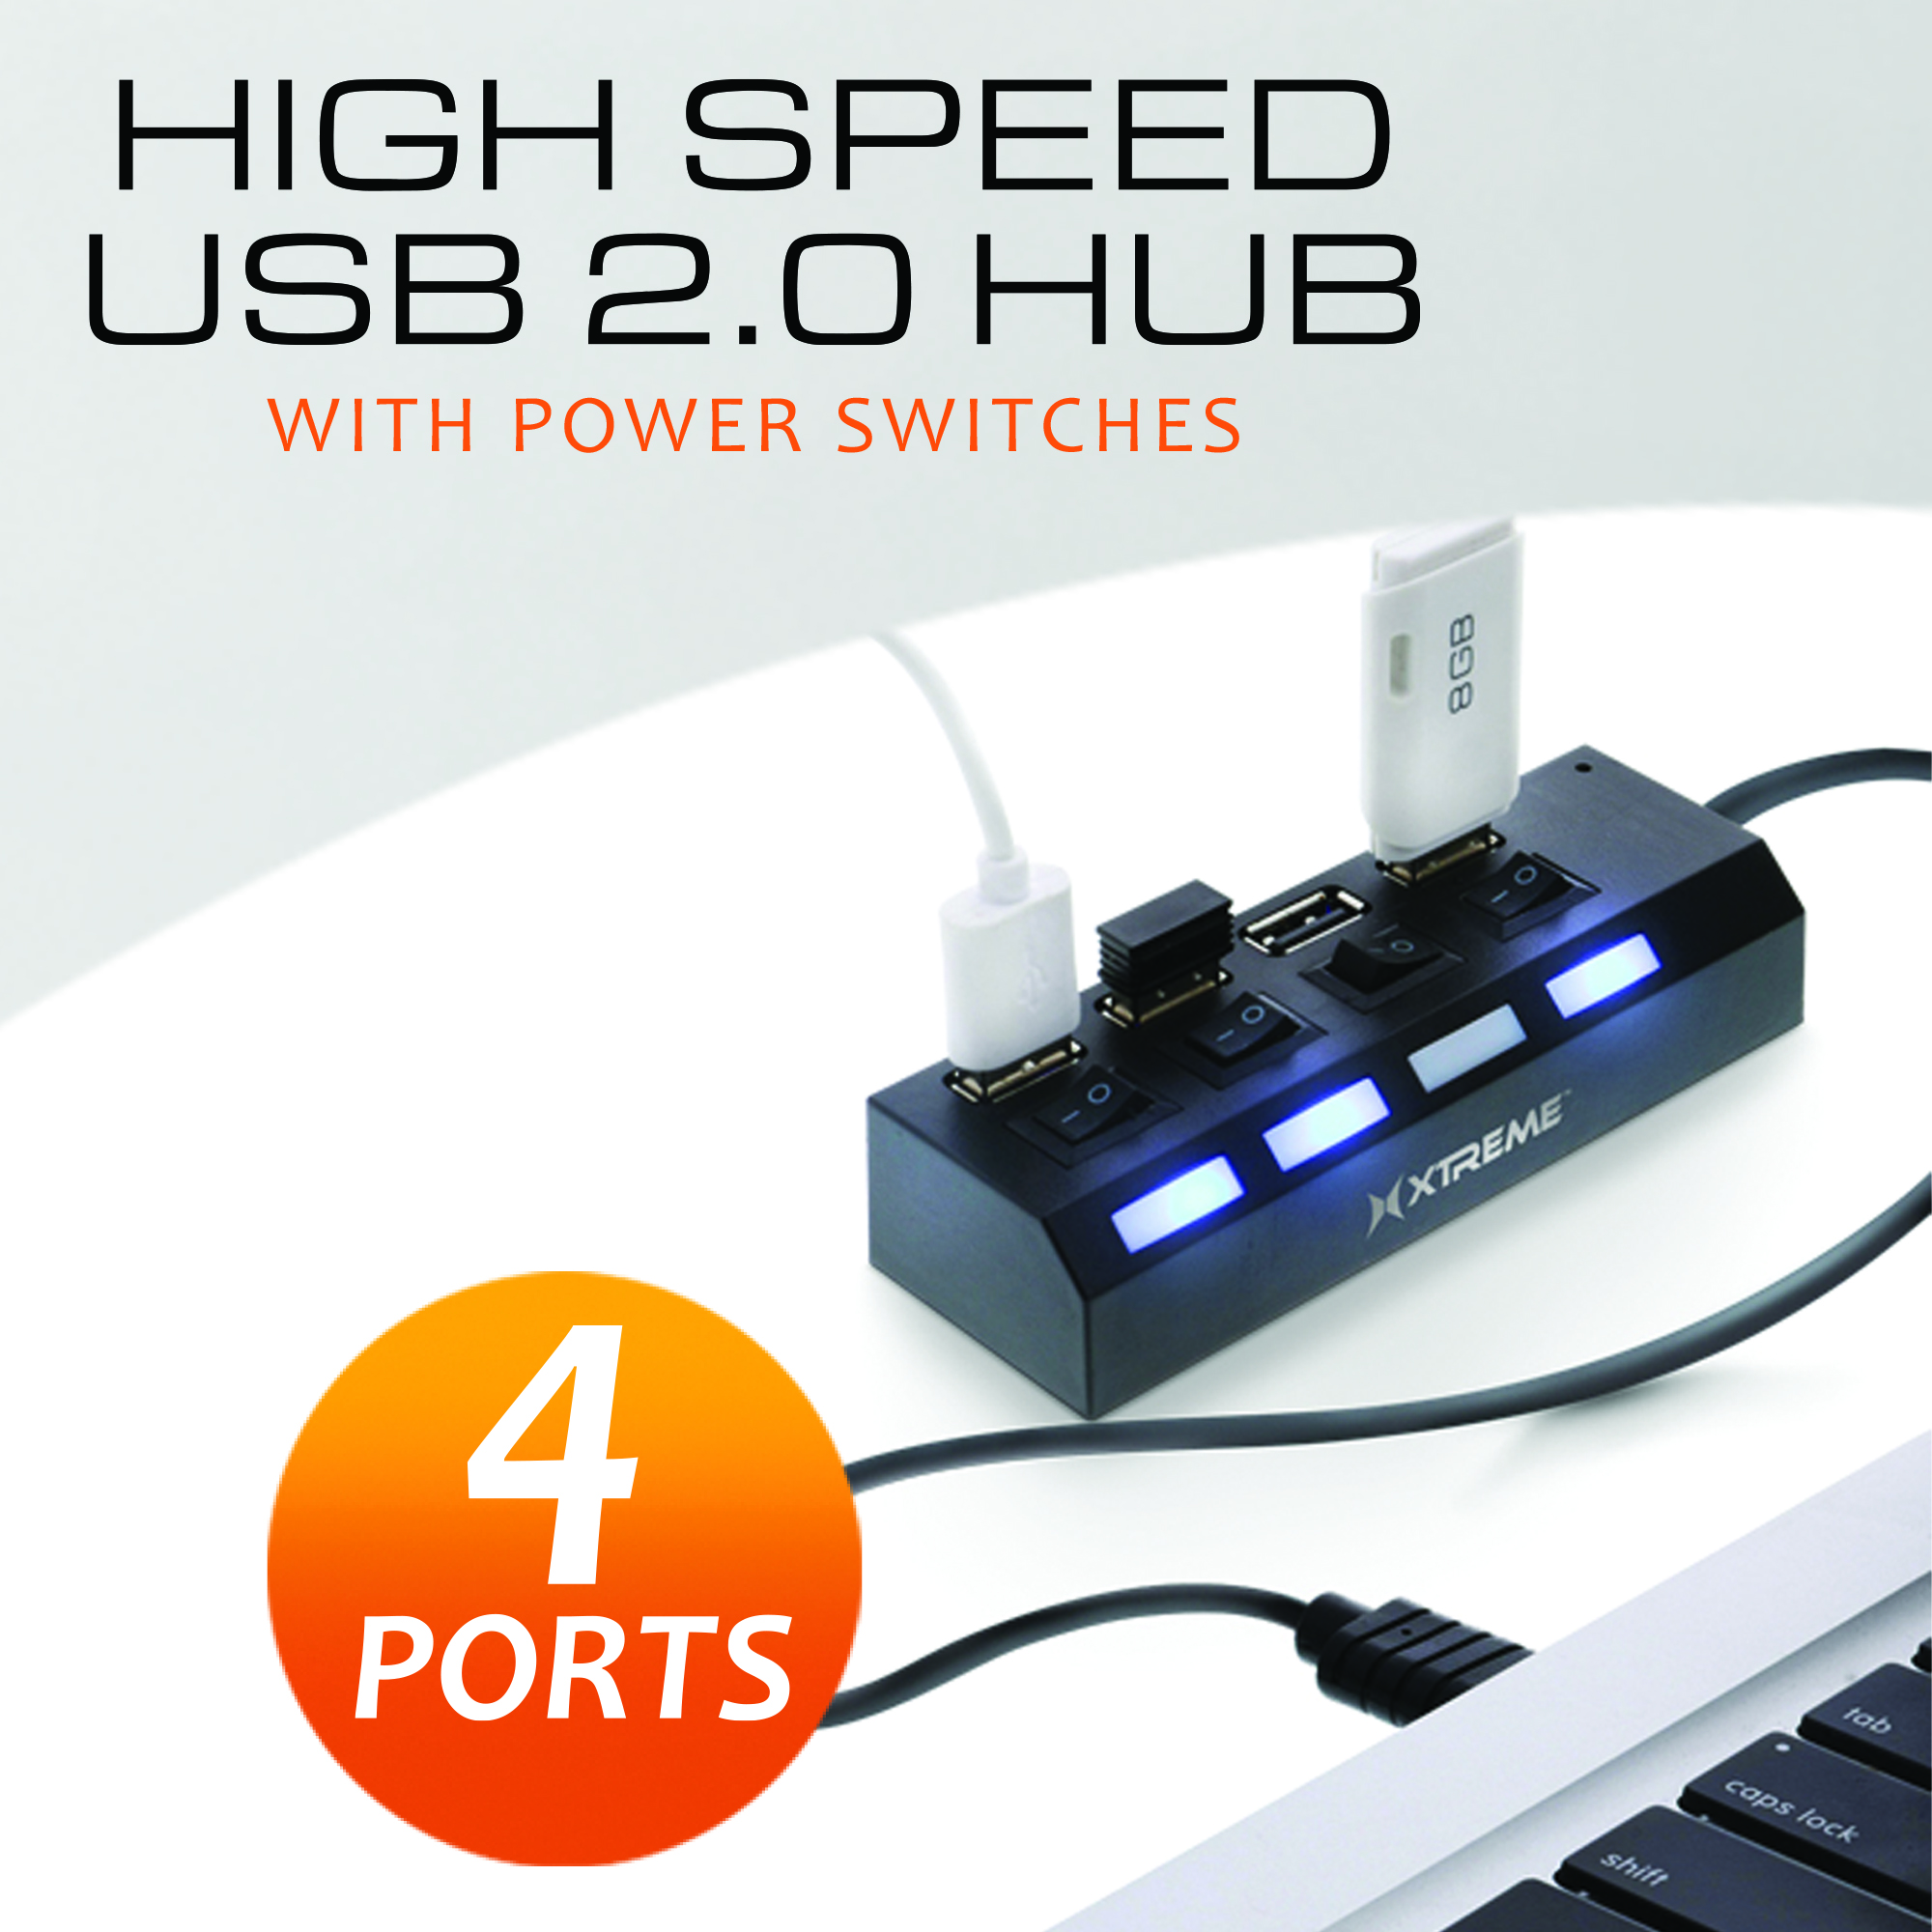 Xtreme Type-C USB 2.0 Hub, 4 Ports, Individual LED Power  Indicators/Switches, Supports Wireless Mice, Flash Drives, Smartphones,  Easy DIY Installation